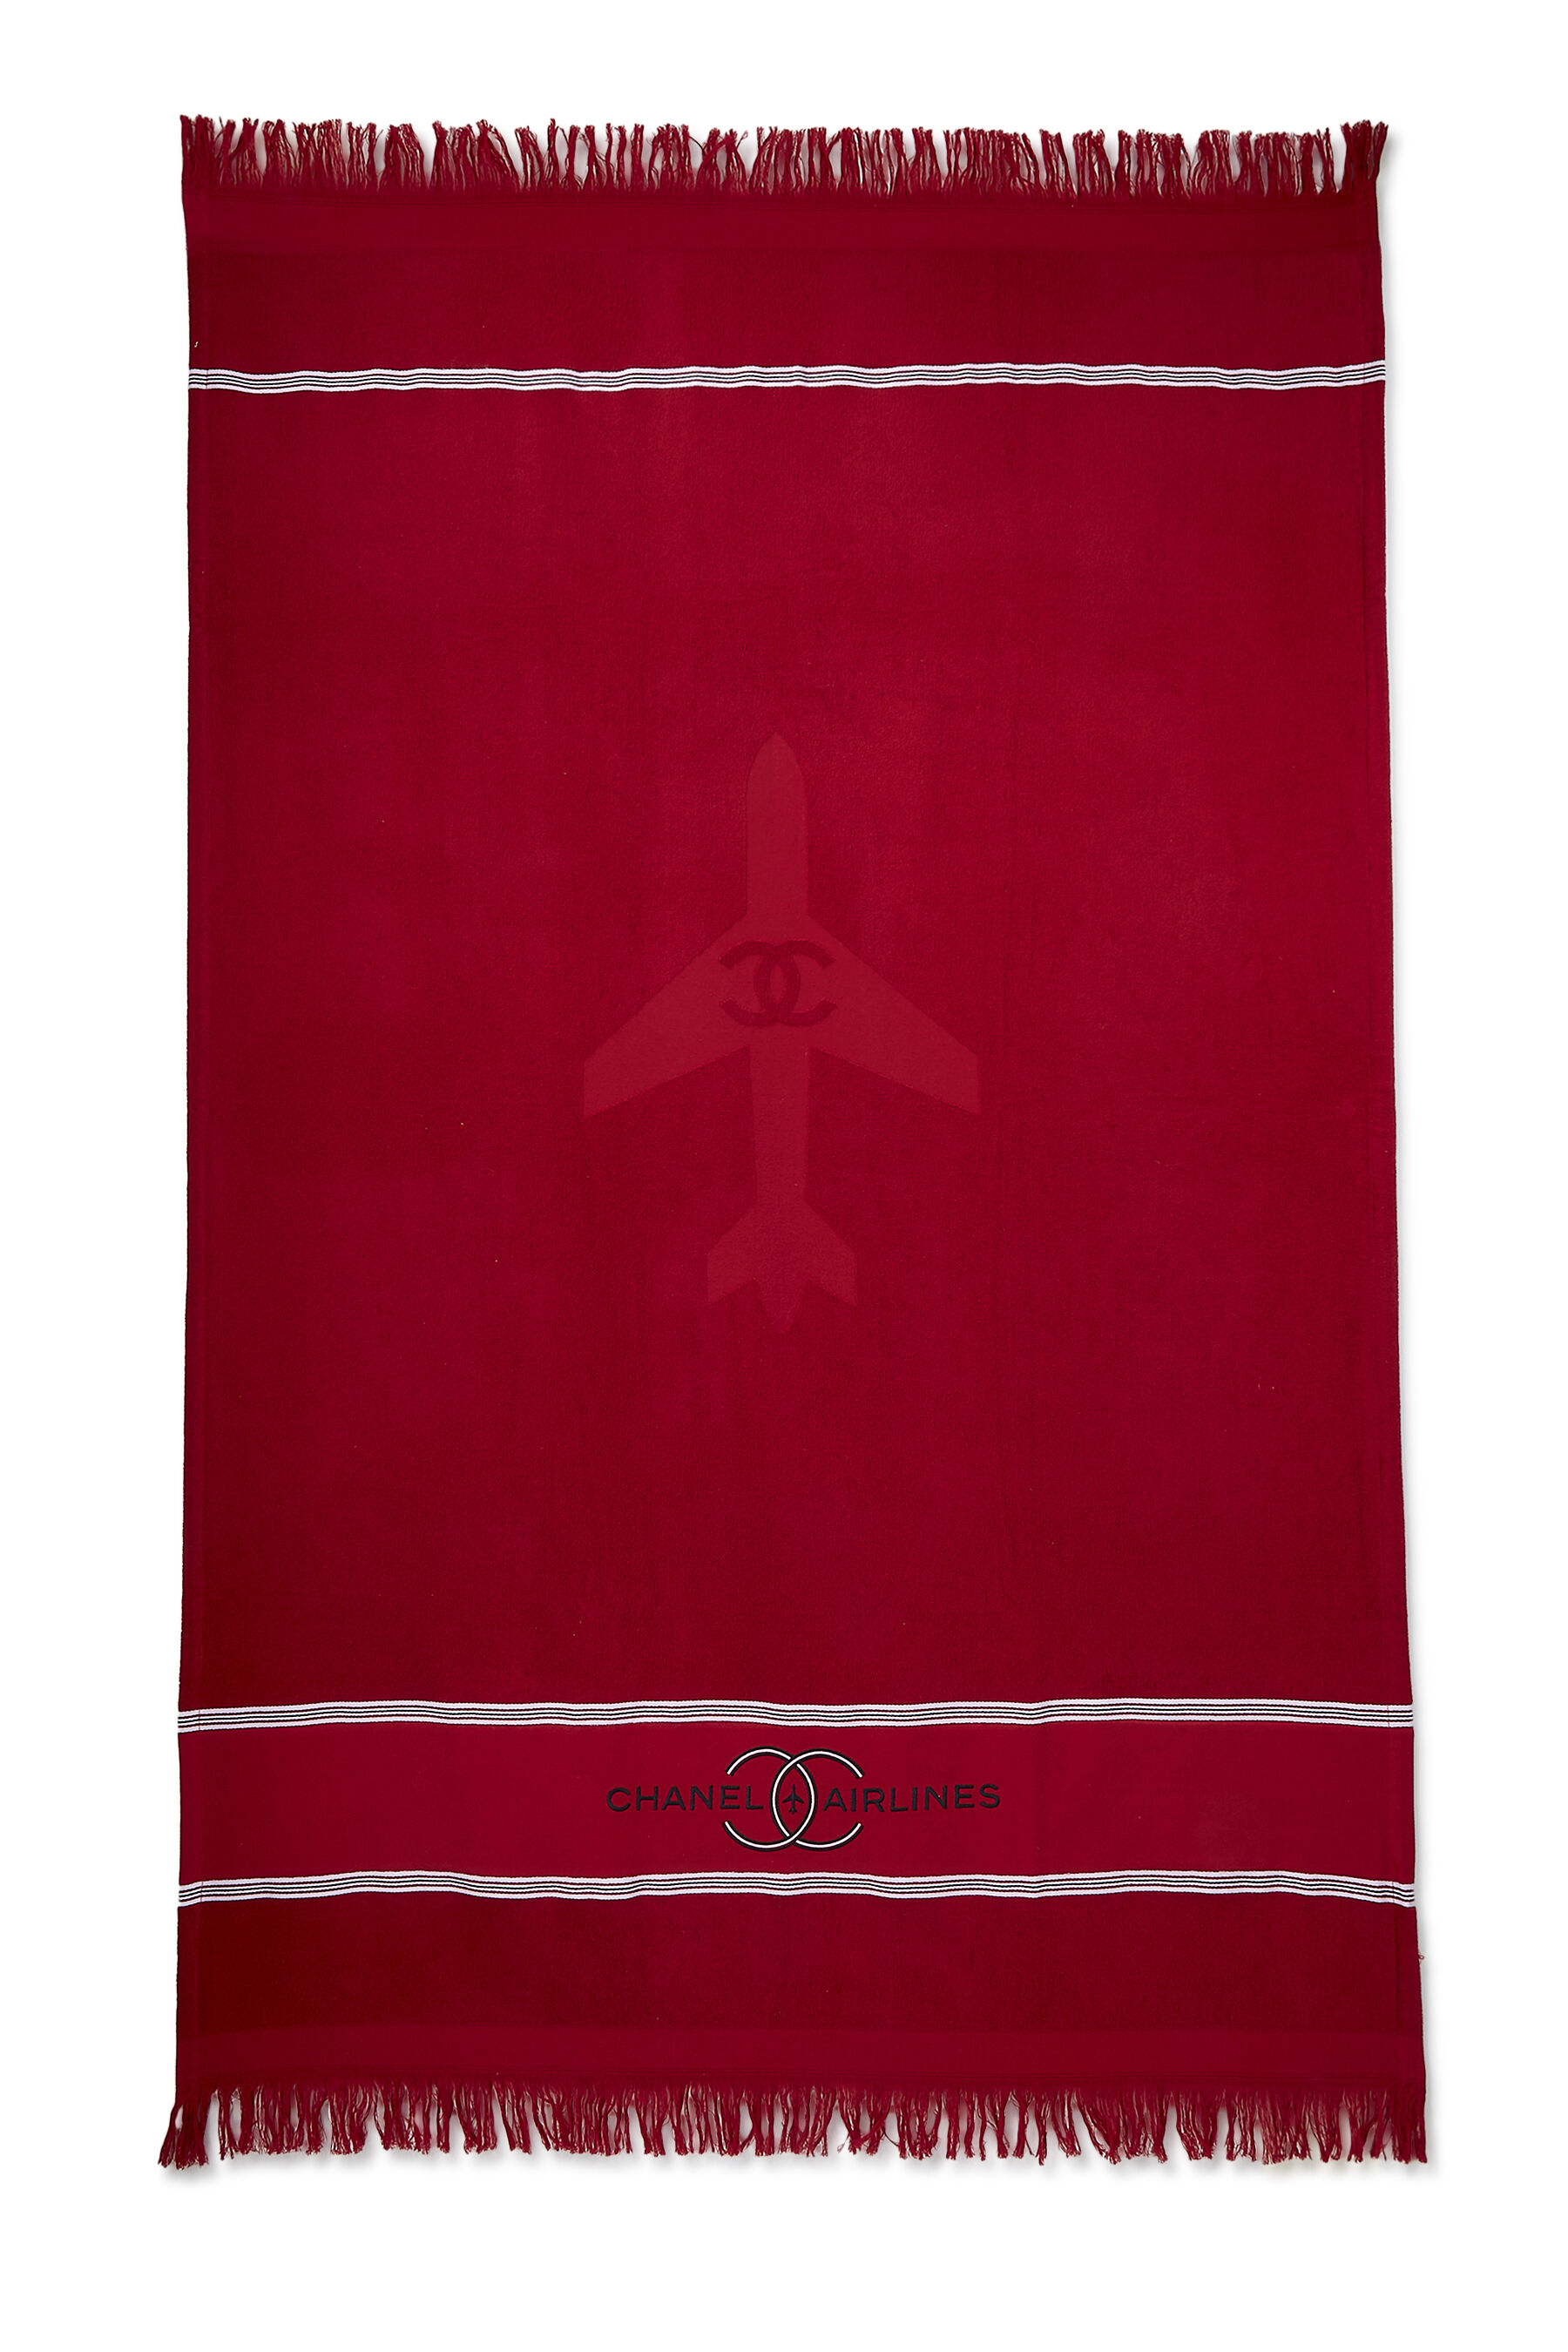 Pre-owned Chanel Red Airline Terry Cloth Beach Towel Xl